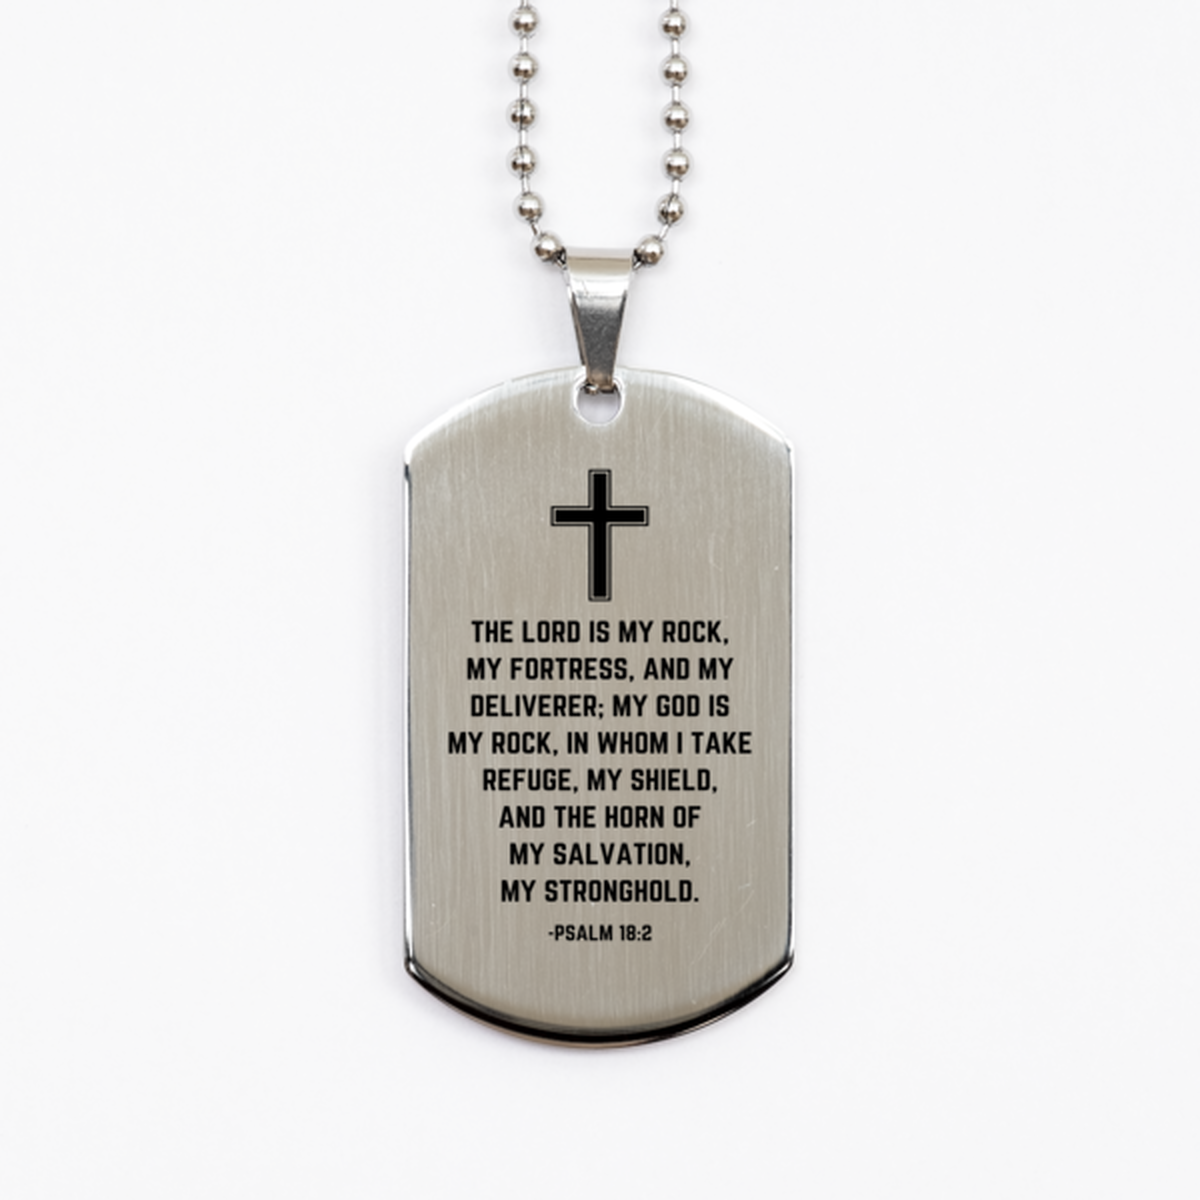 Baptism Gifts For Teenage Boys Girls, Christian Bible Verse Silver Dog Tag, The Lord is my rock, Confirmation Gifts, Bible Verse Necklace for Son, Godson, Grandson, Nephew